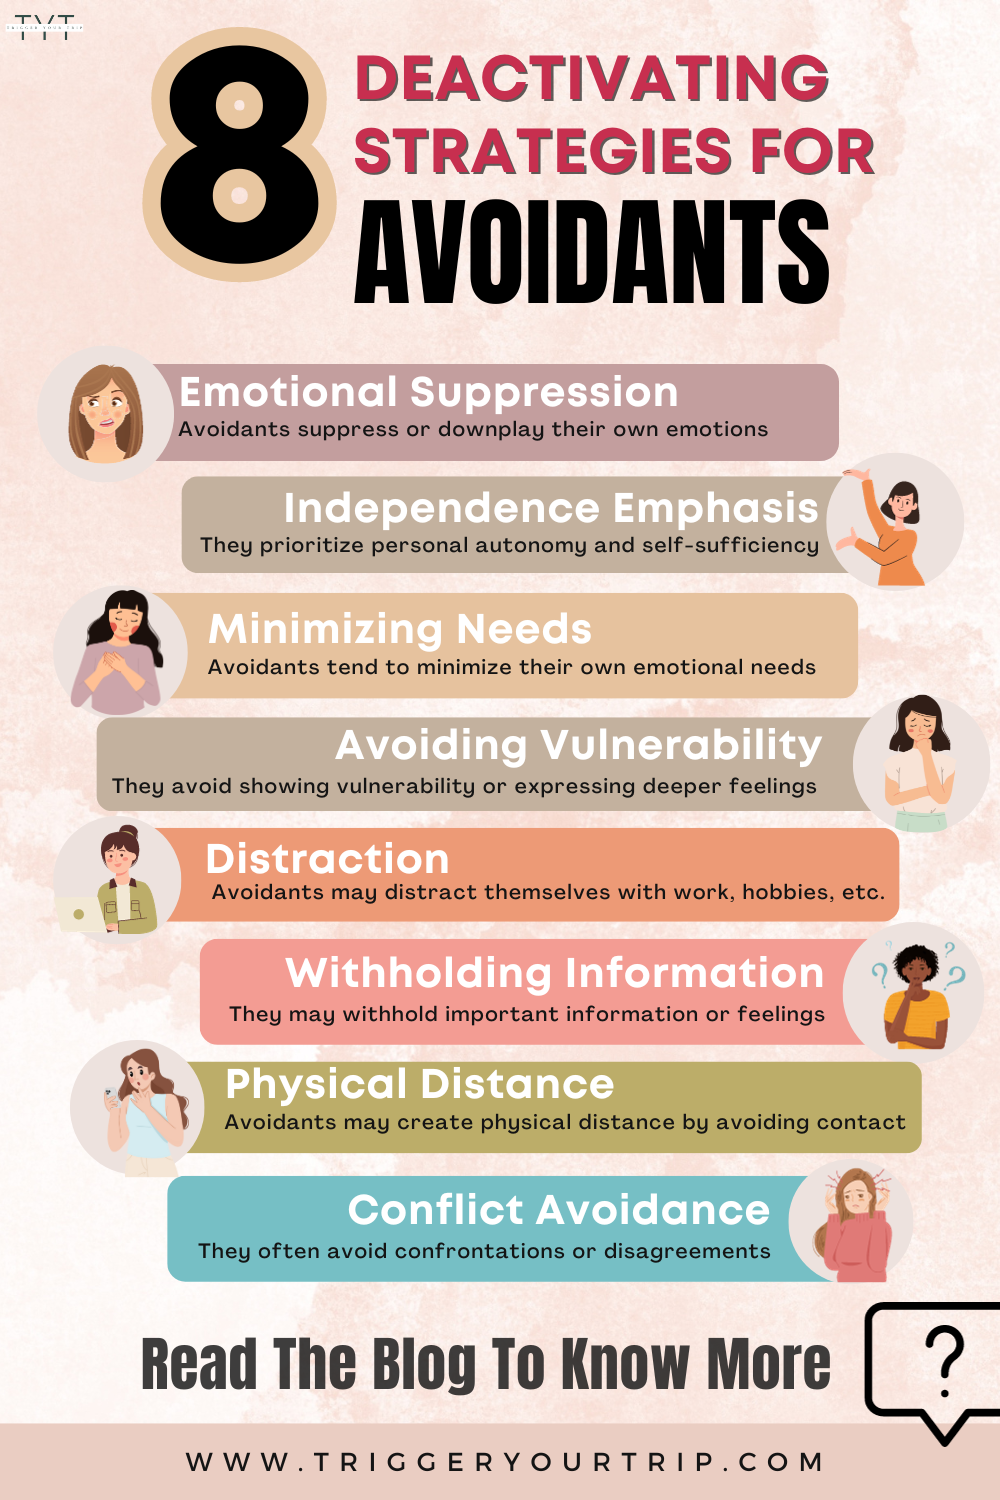 the most common deactivating strategies for avoidants, when a partner negatively recognize self regulating